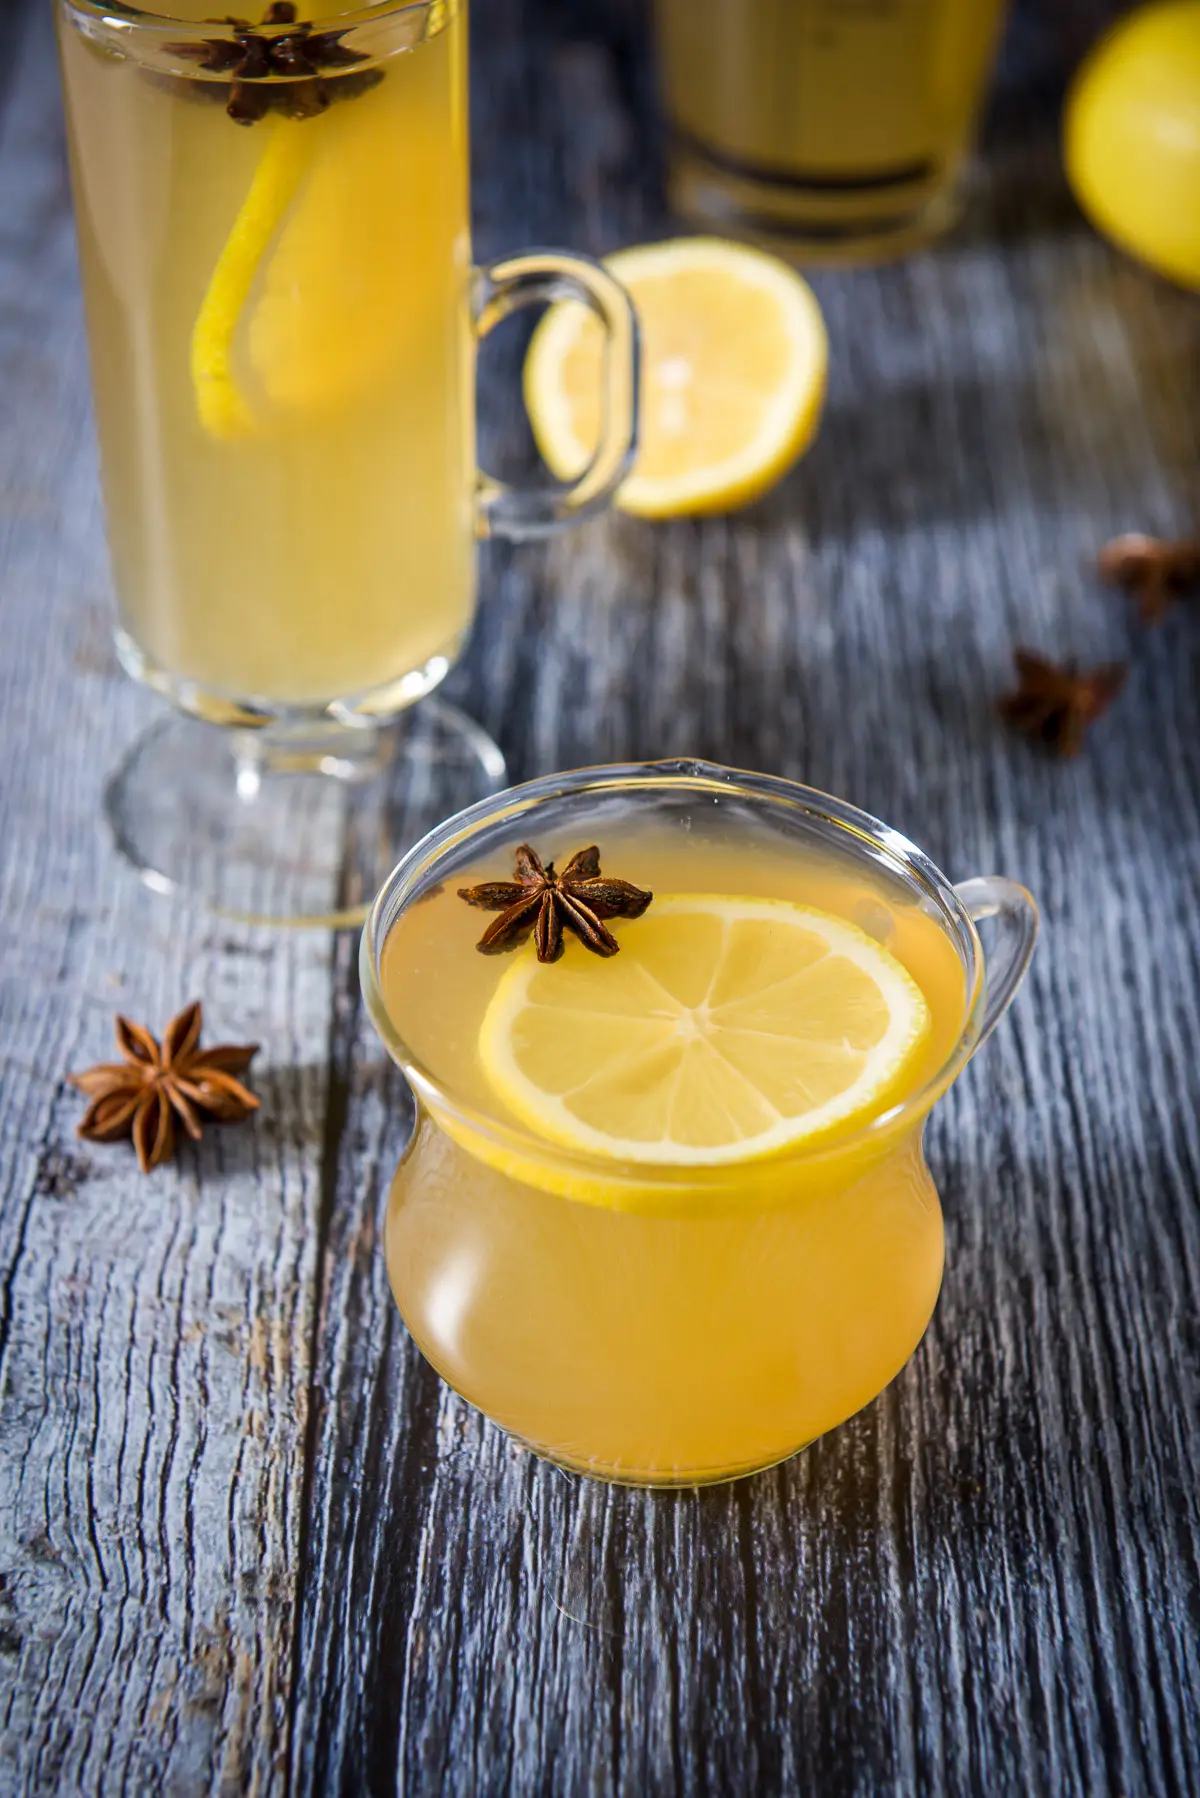 Hot Toddy Recipe (with maple syrup!) - Fit Foodie Finds